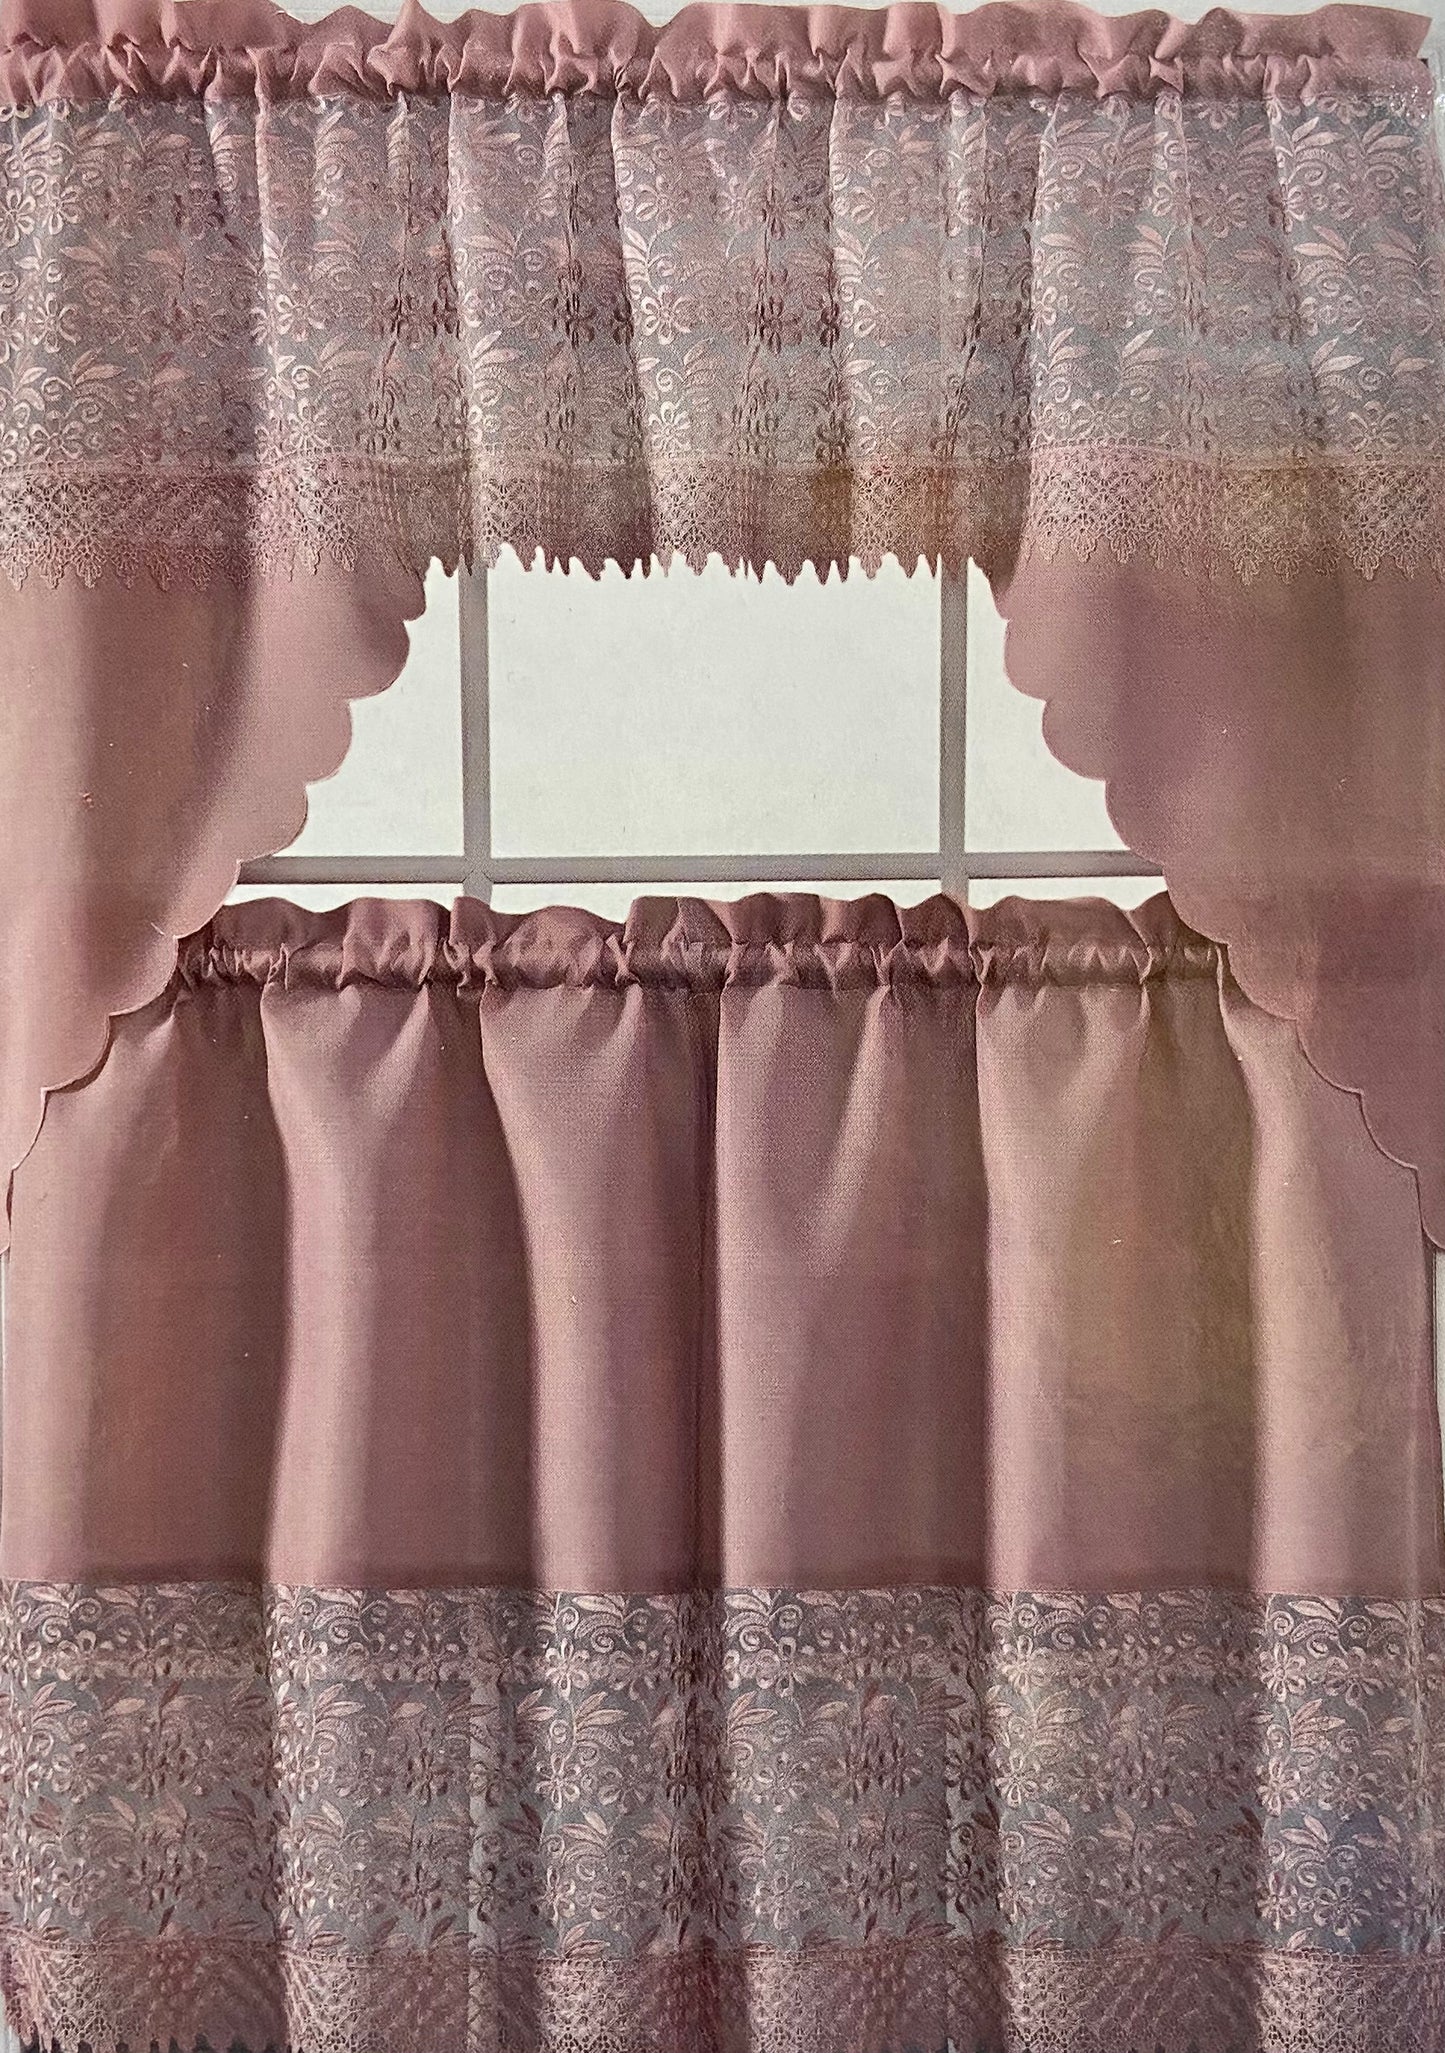 Embroidered 3 Piece Lace Kitchen Curtain Set